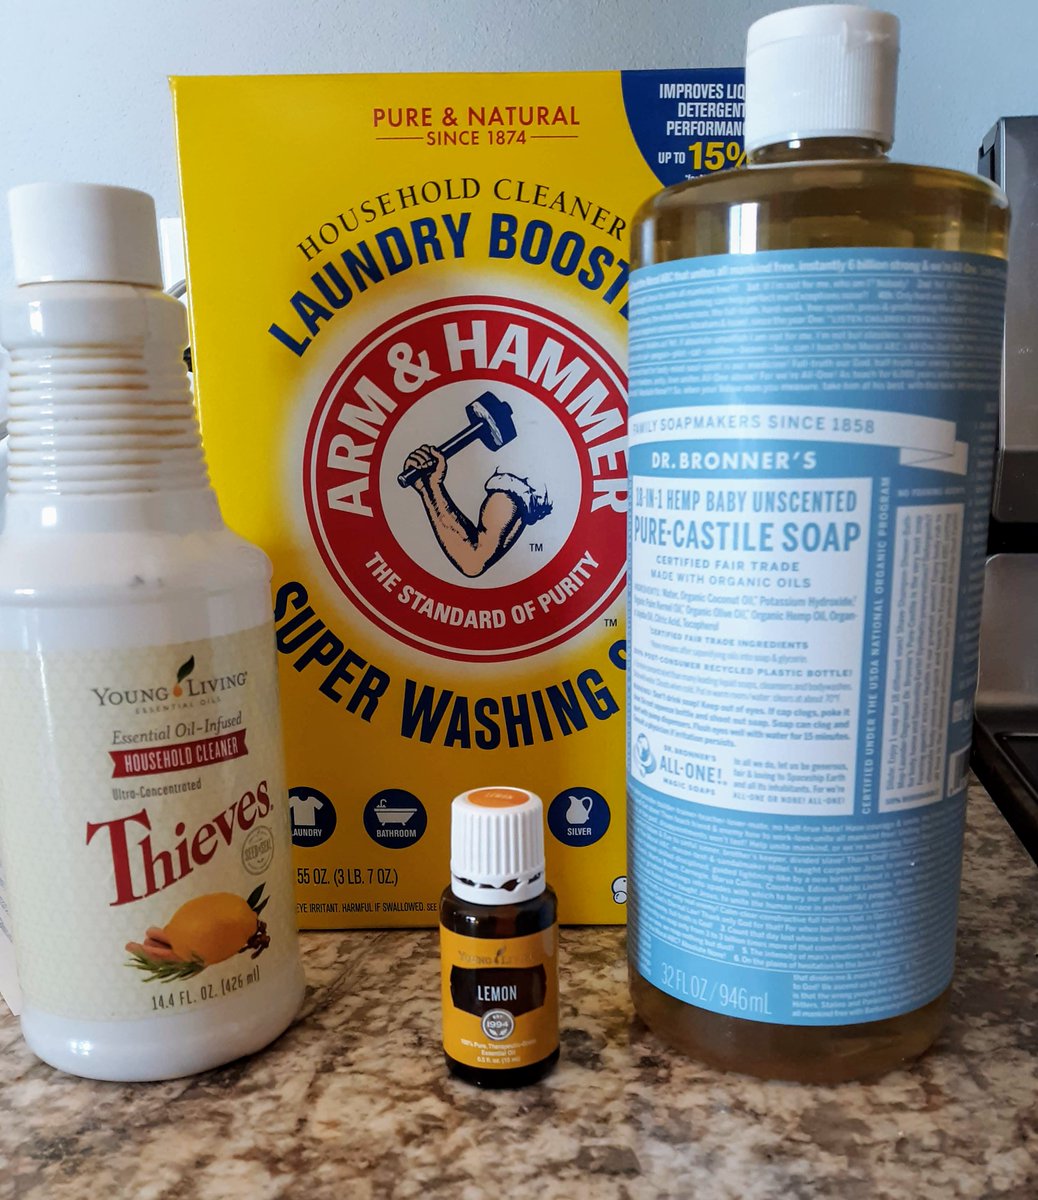 Time to whip up another batch of laundry detergent! It's #laundryday! #frugalandoily #DIYmom #DIYdetergent #makemyownsoap #nontoxicliving #smallbudget
alifeonadime.com/2019/10/19/my-…